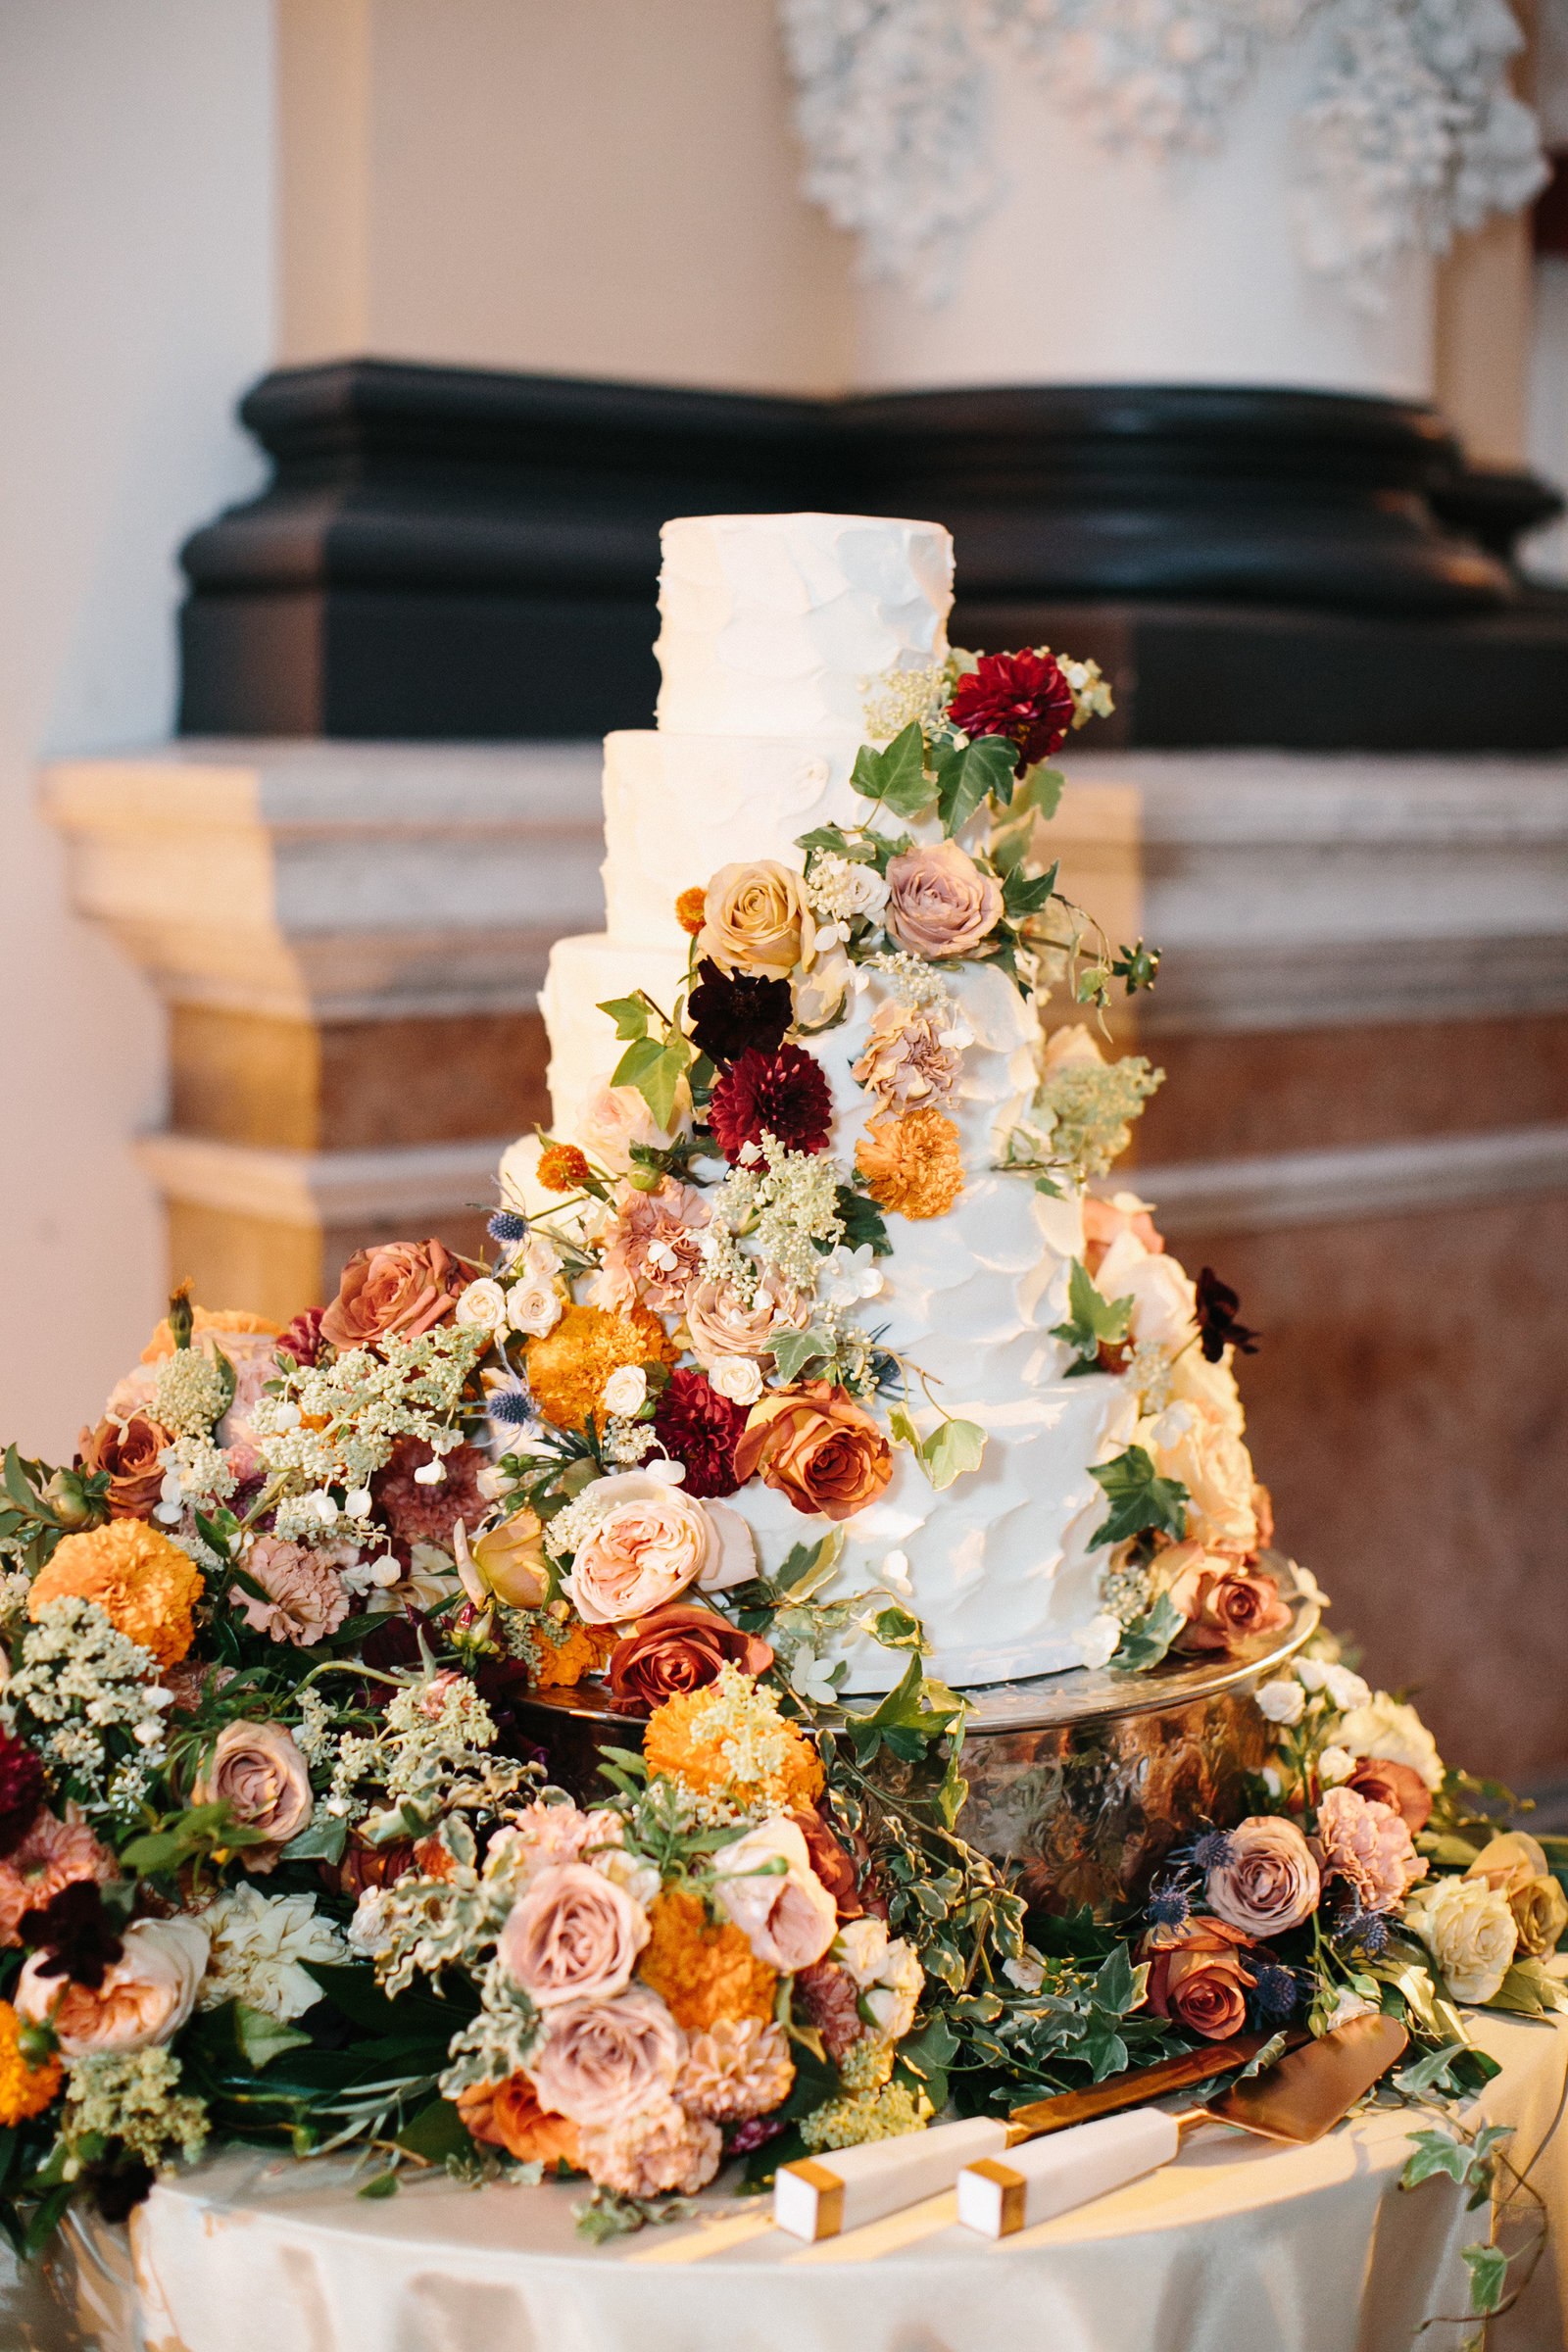 Incredible cake and floral design for this elegant wedding reception at this Philadelphia Museum.